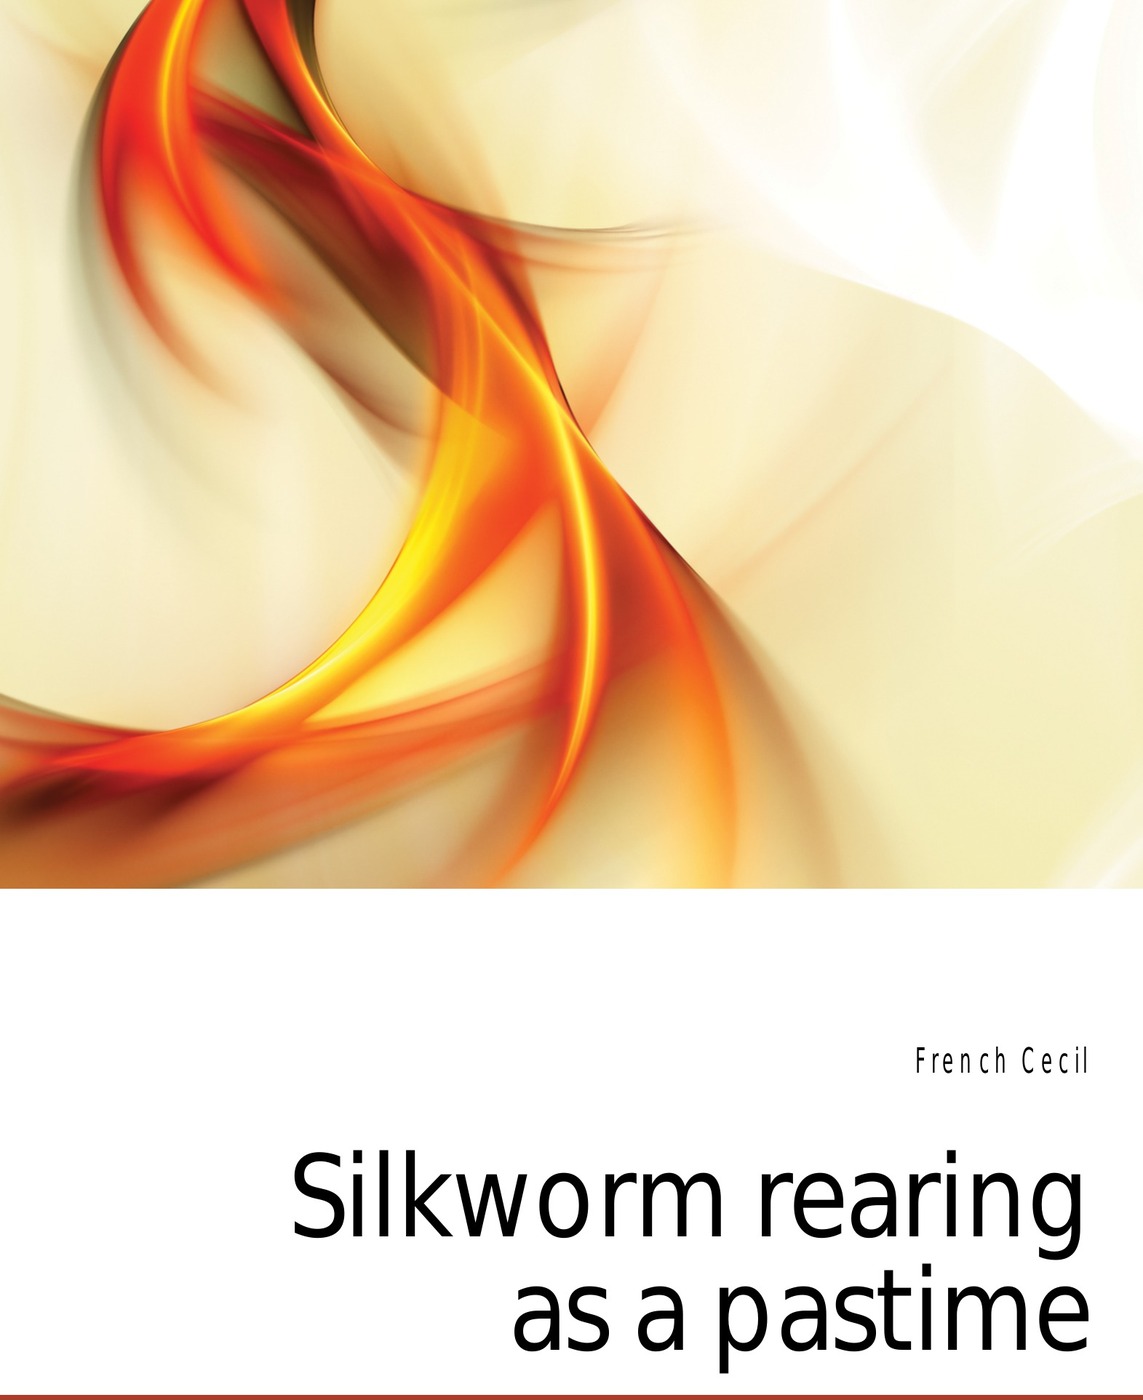 Silkworm rearing as a pastime